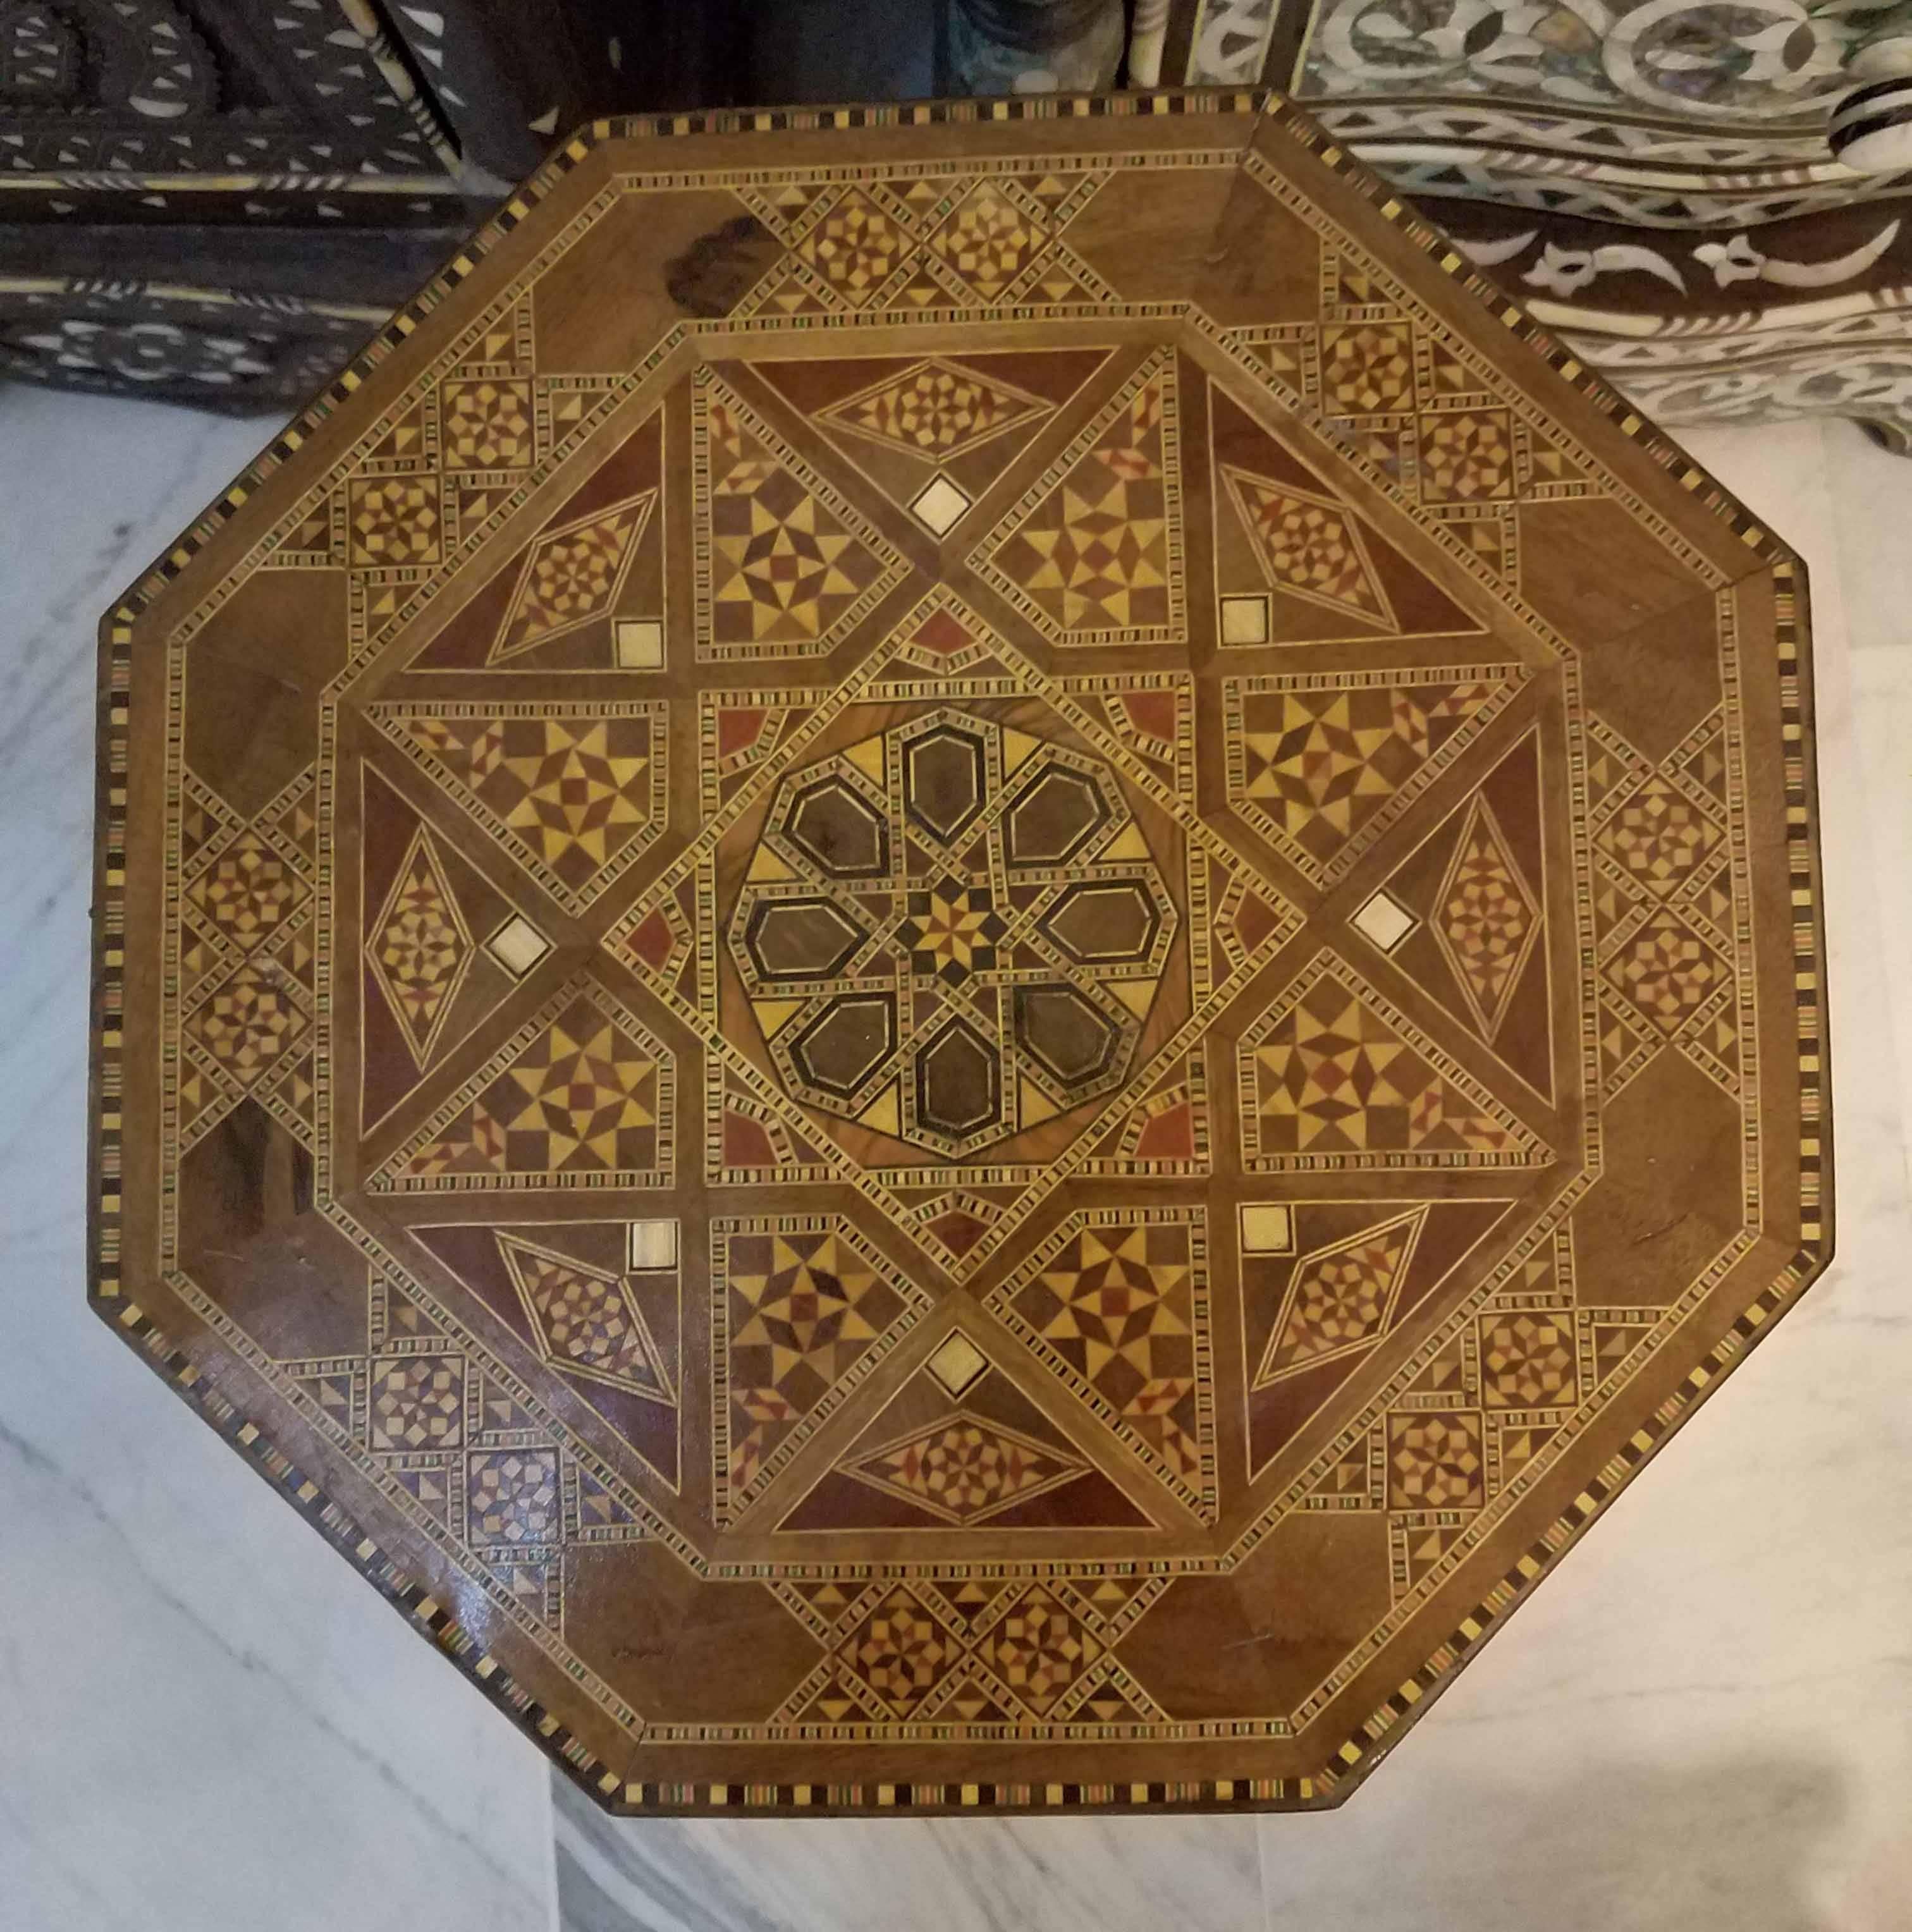 Gorgeous Syrian style marquetry side table made in Morocco. Walnut wood. Approximately 19" in height, and 14" in diameter. Great add-on or an accent piece to any décor, and any part of the house or office.
Must see to appreciate. Pictures